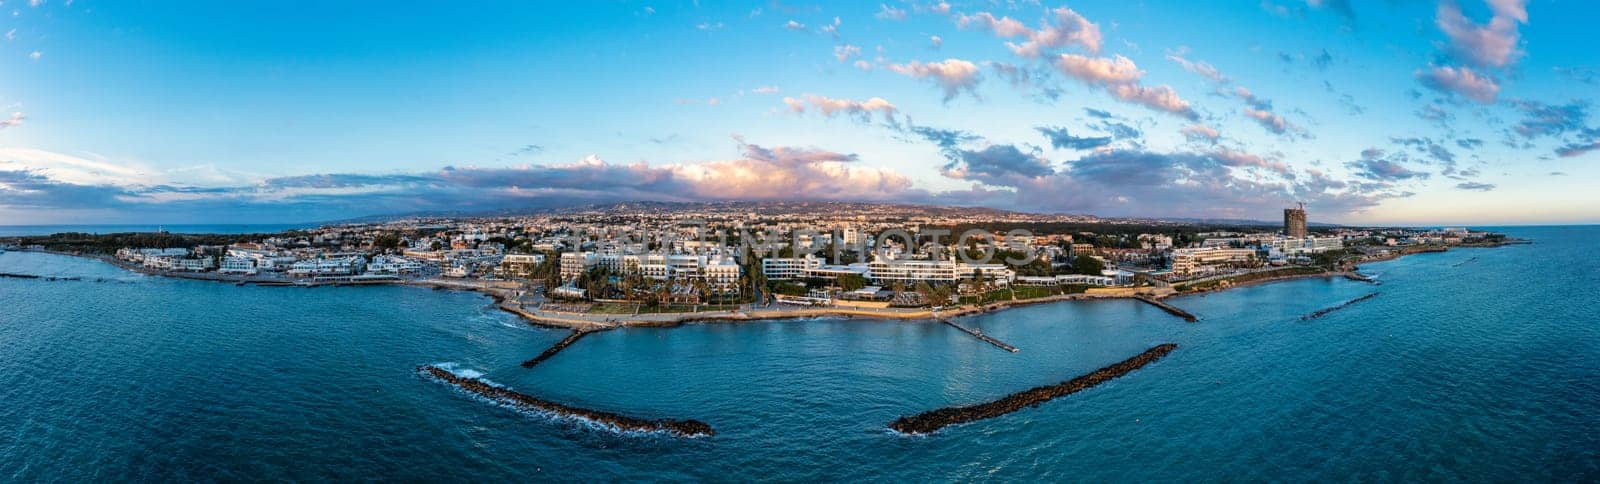 View of the town of Paphos in Cyprus. Paphos is known as the center of ancient history and culture of the island. View of embankment at Paphos Harbour, Cyprus. by DaLiu